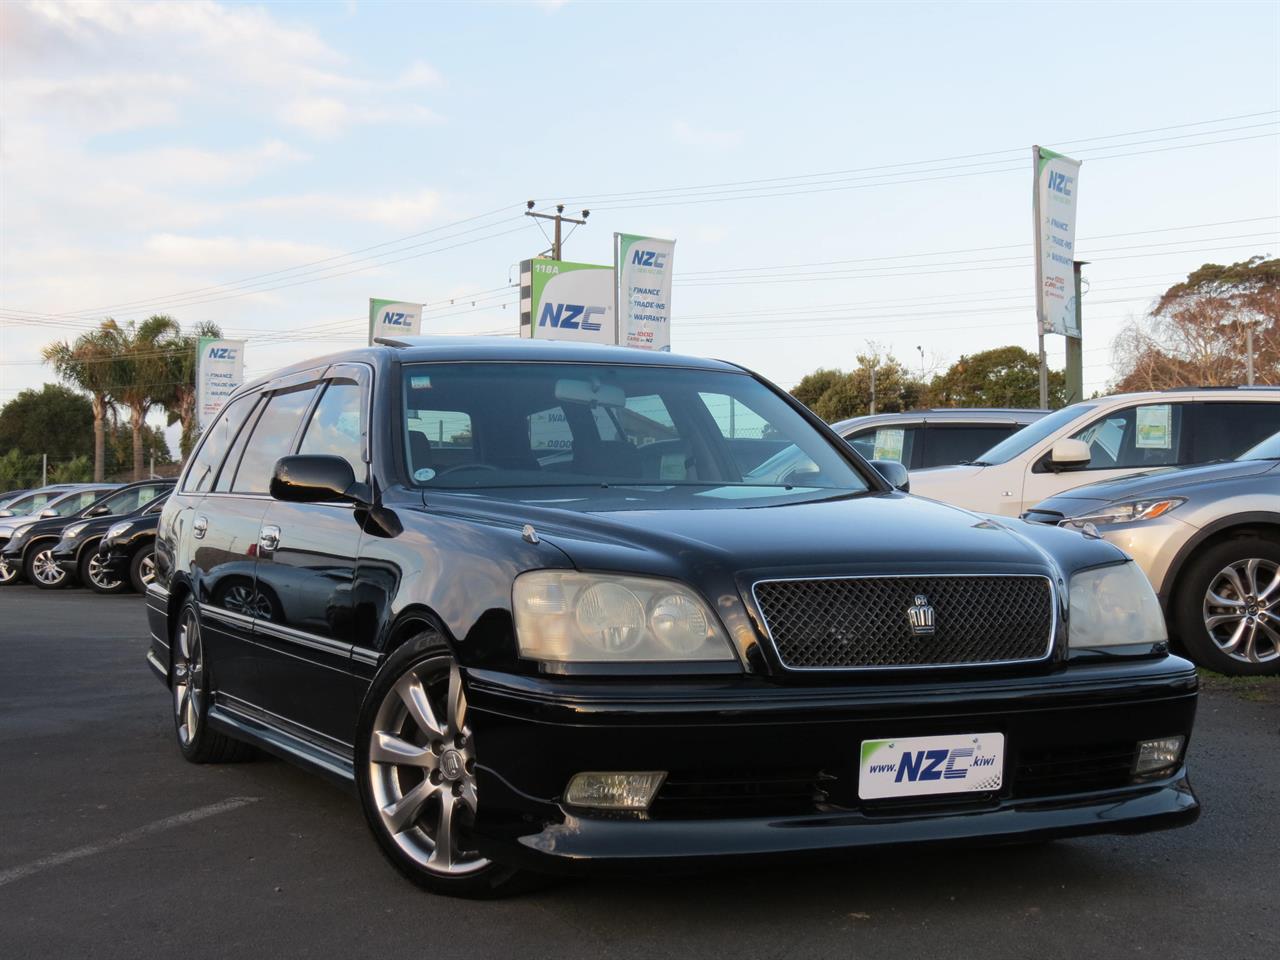 NZC 2001 Toyota Crown just arrived to Auckland